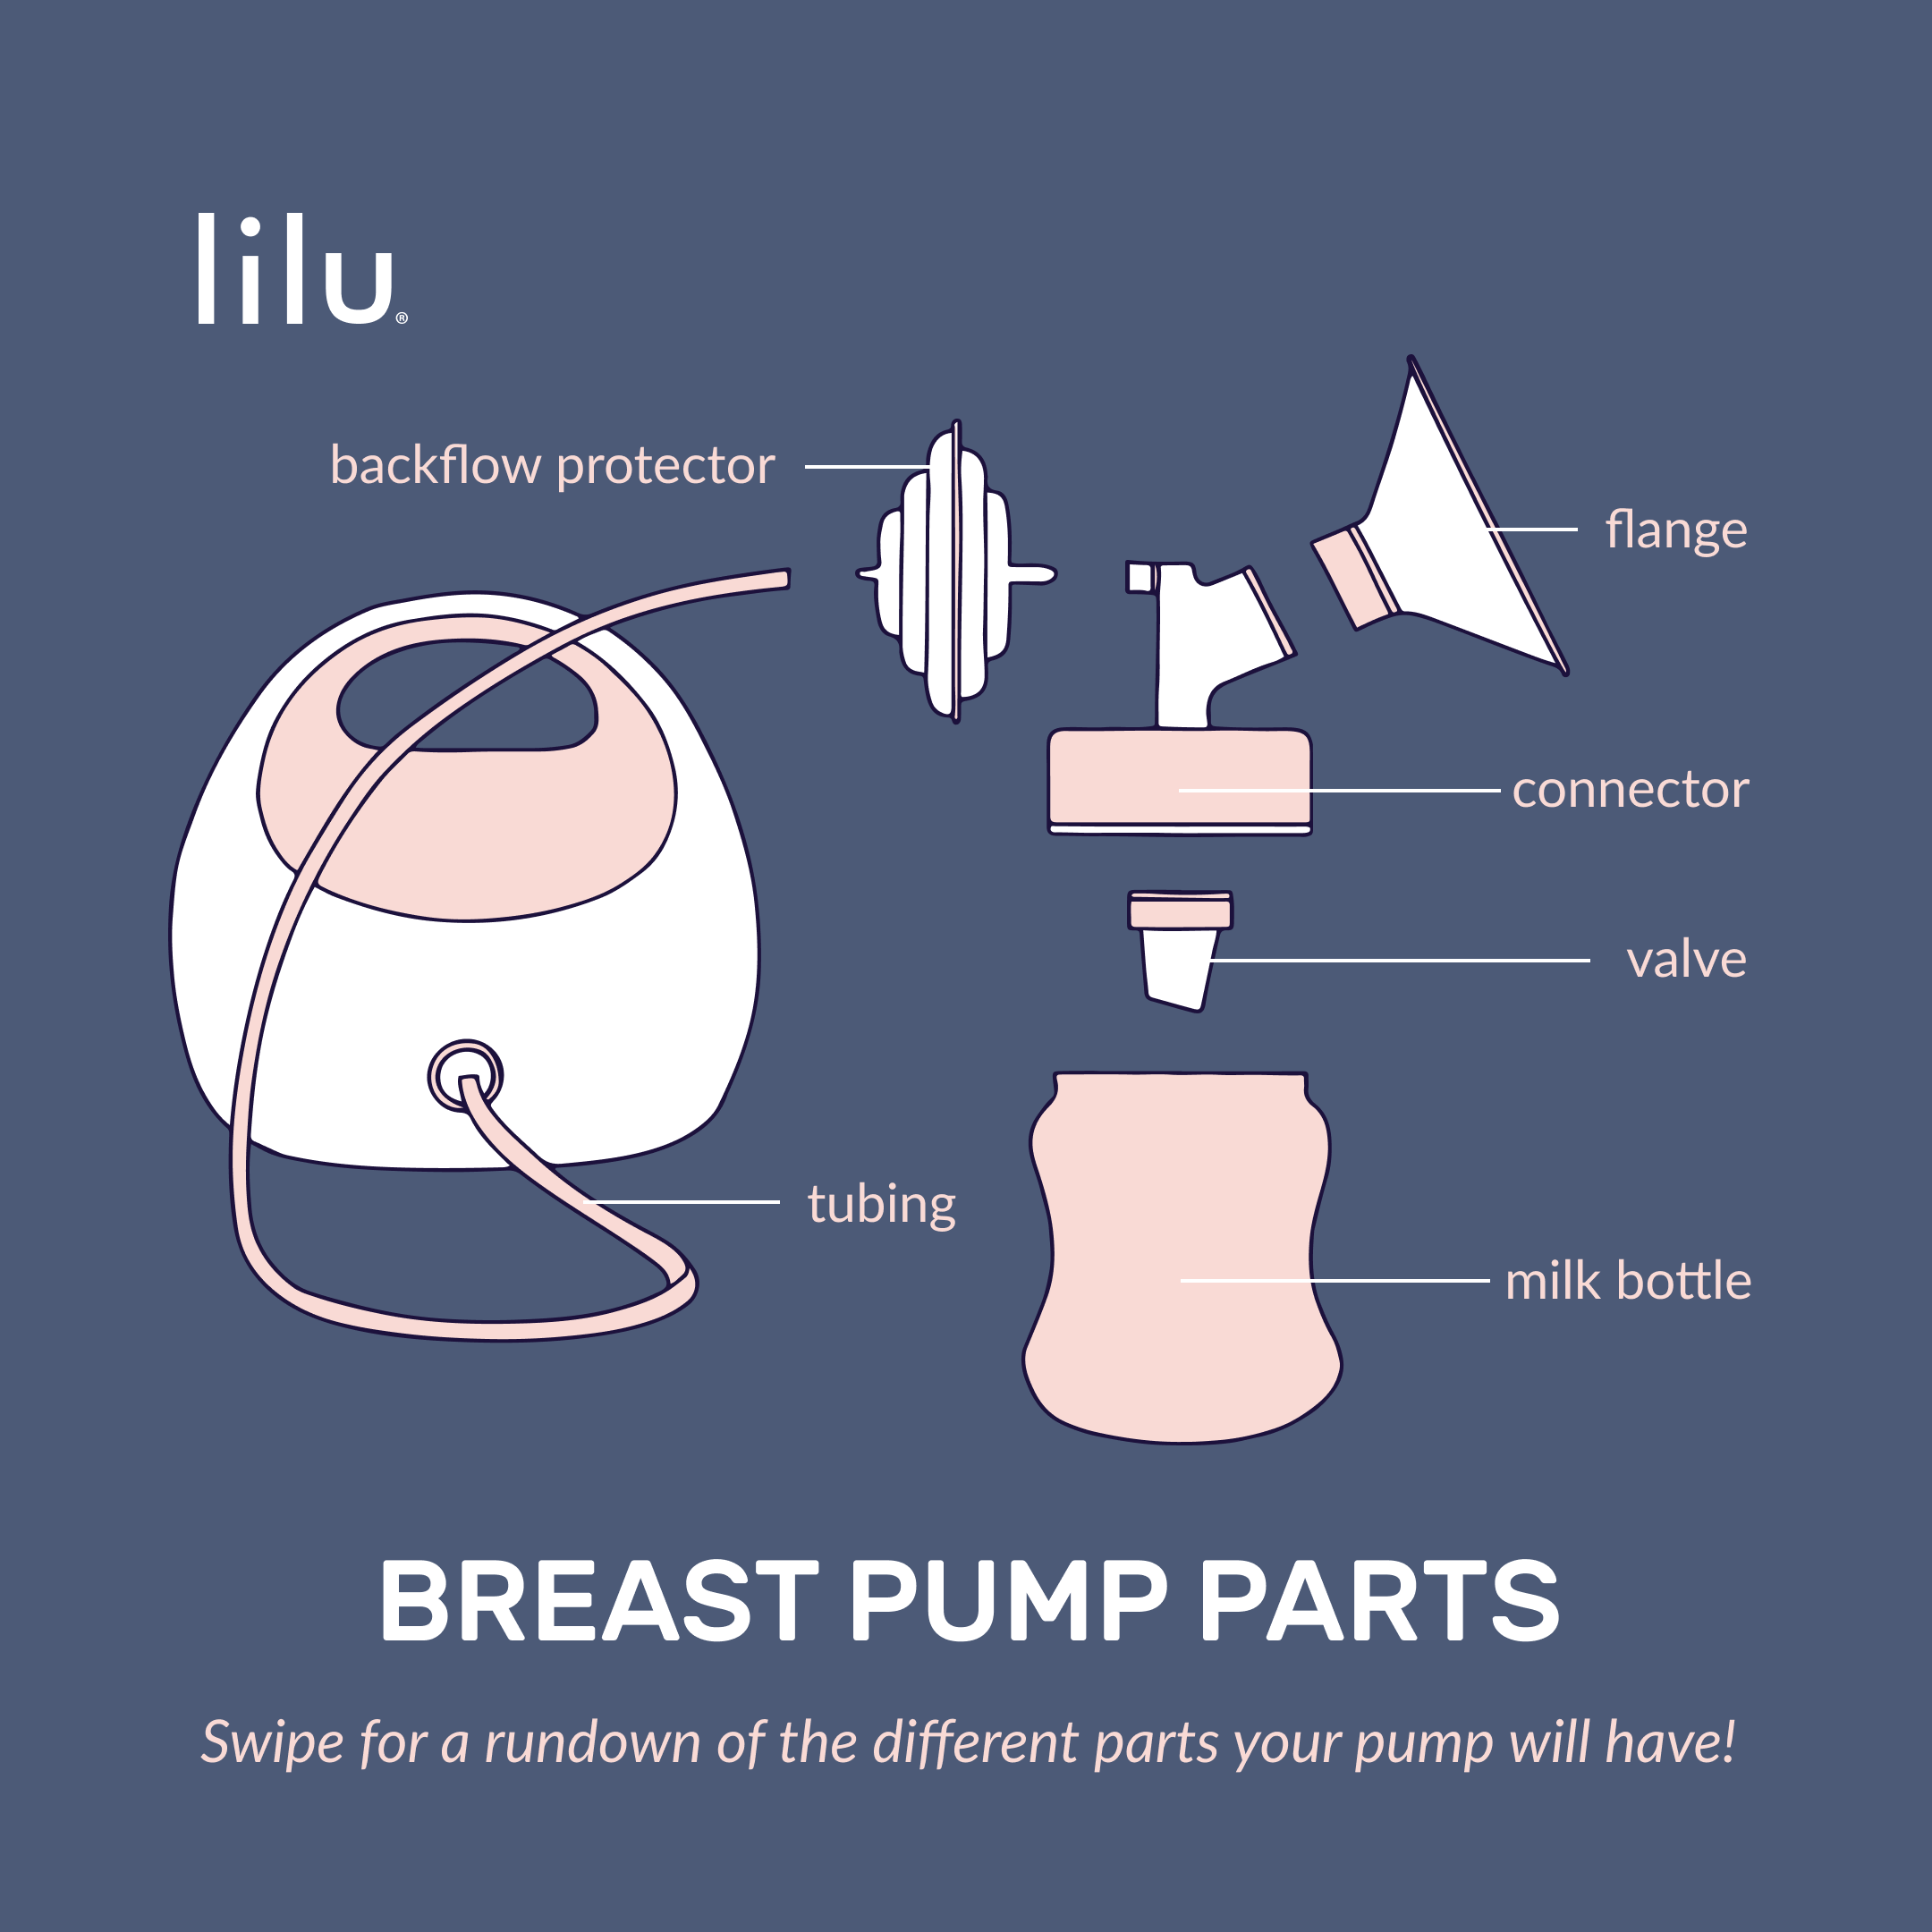 Aware of the BRA PARTS and their ROLEs - The Importance of a Well